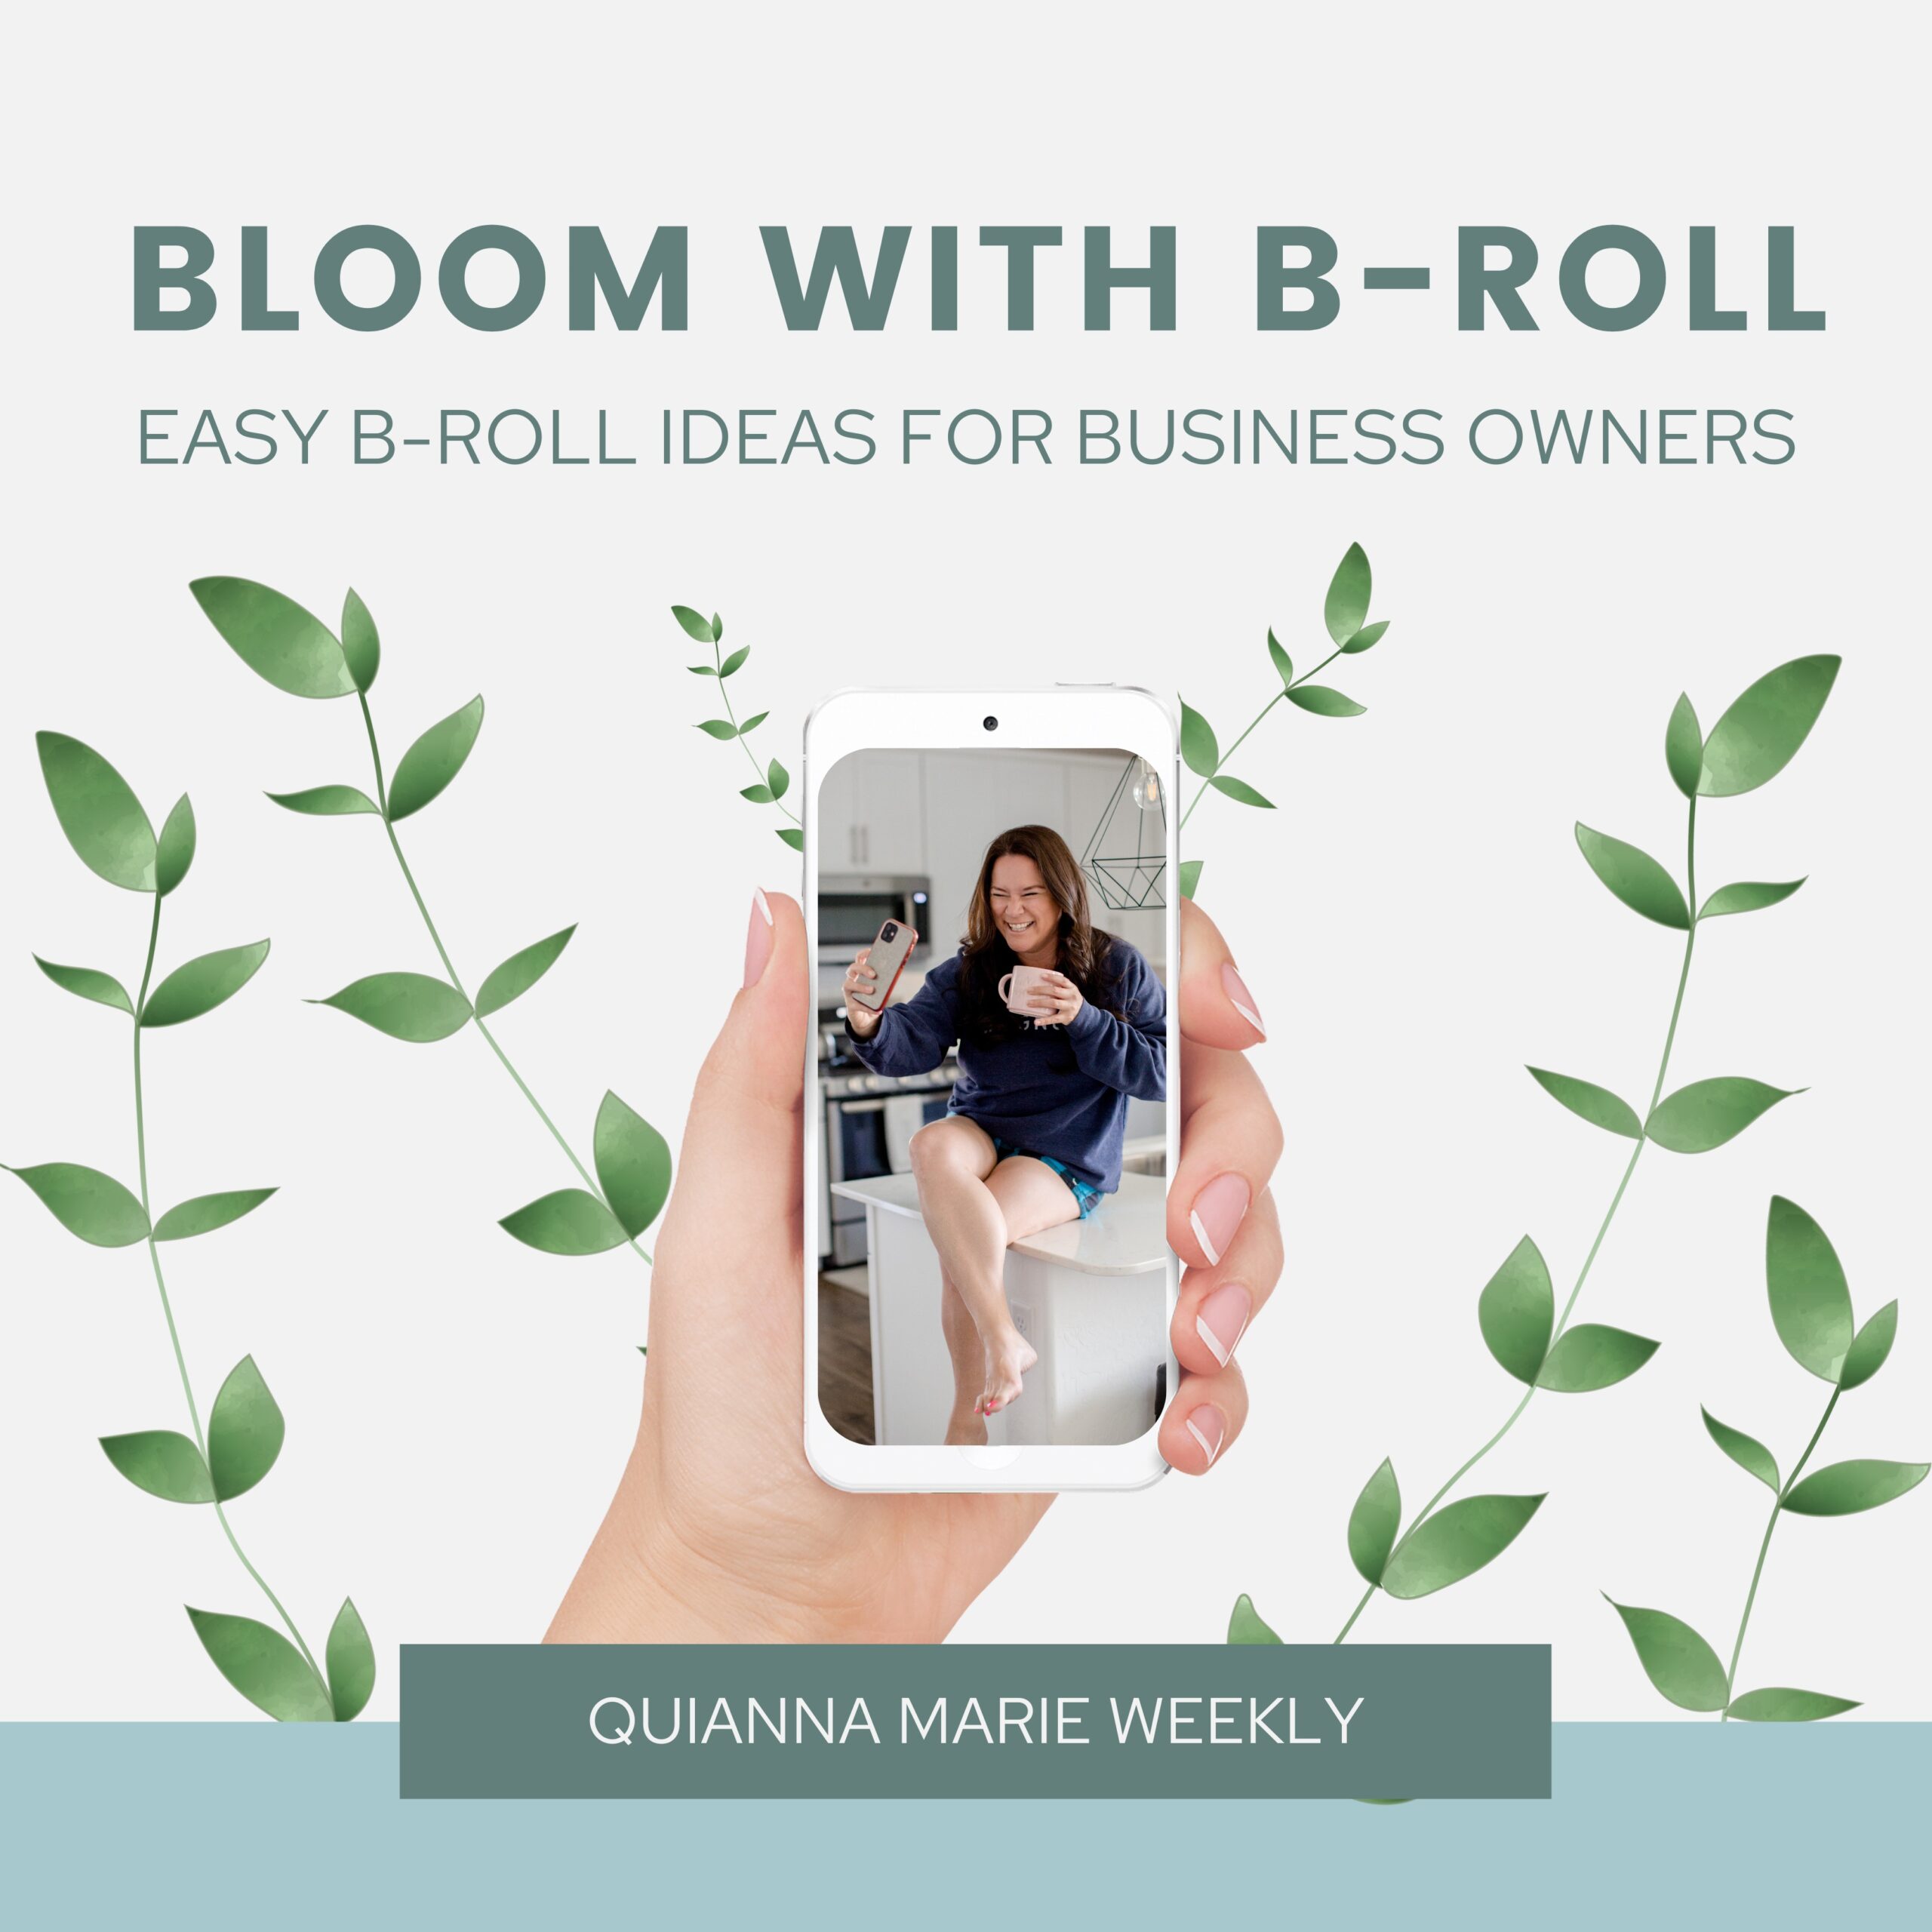 Easy B-Roll Ideas for Business Owners - Book More Clients with B-Roll